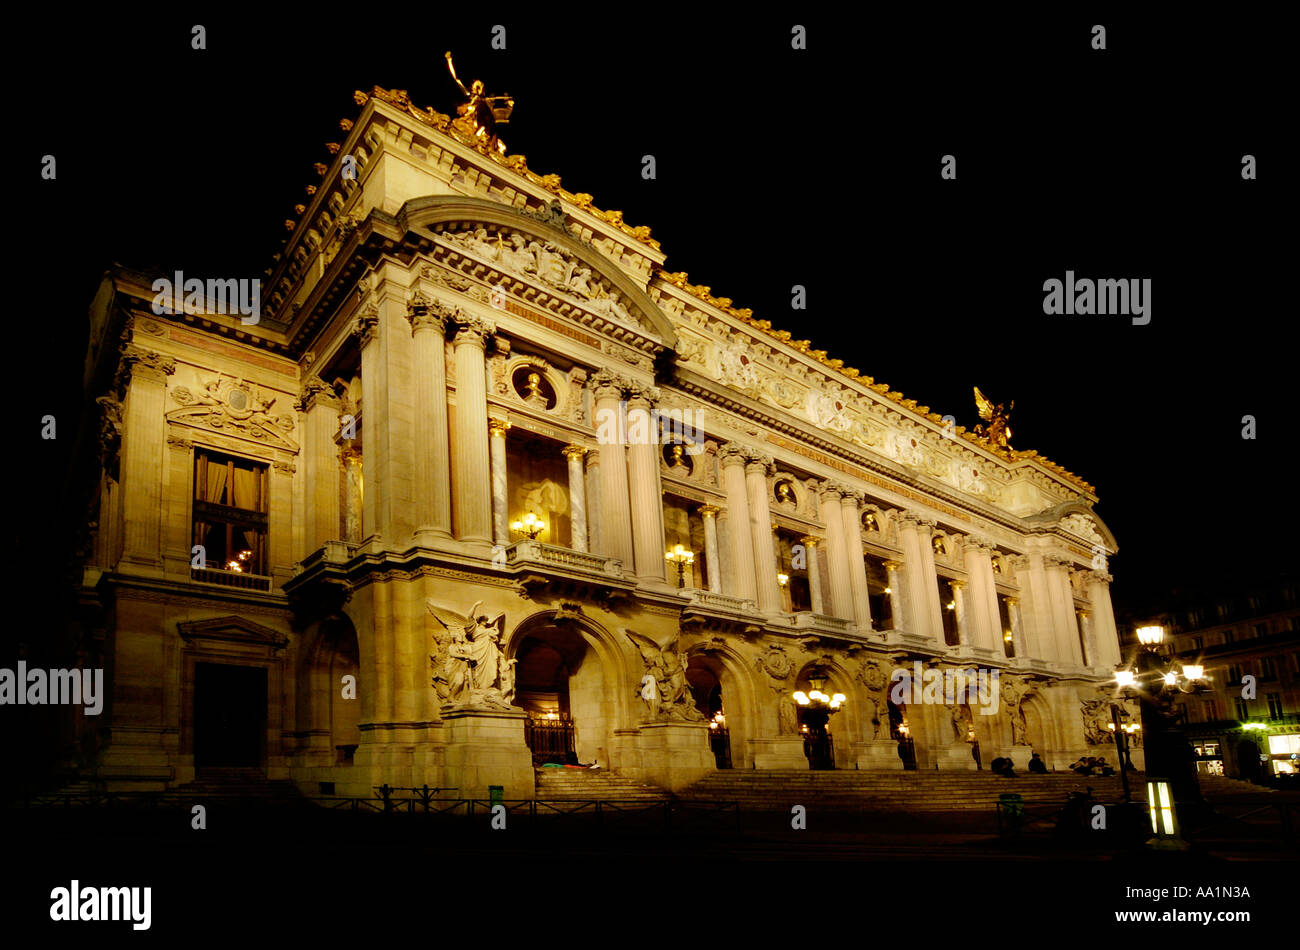 Opera House In The Night Paris France Stock Photo 4075833 Alamy